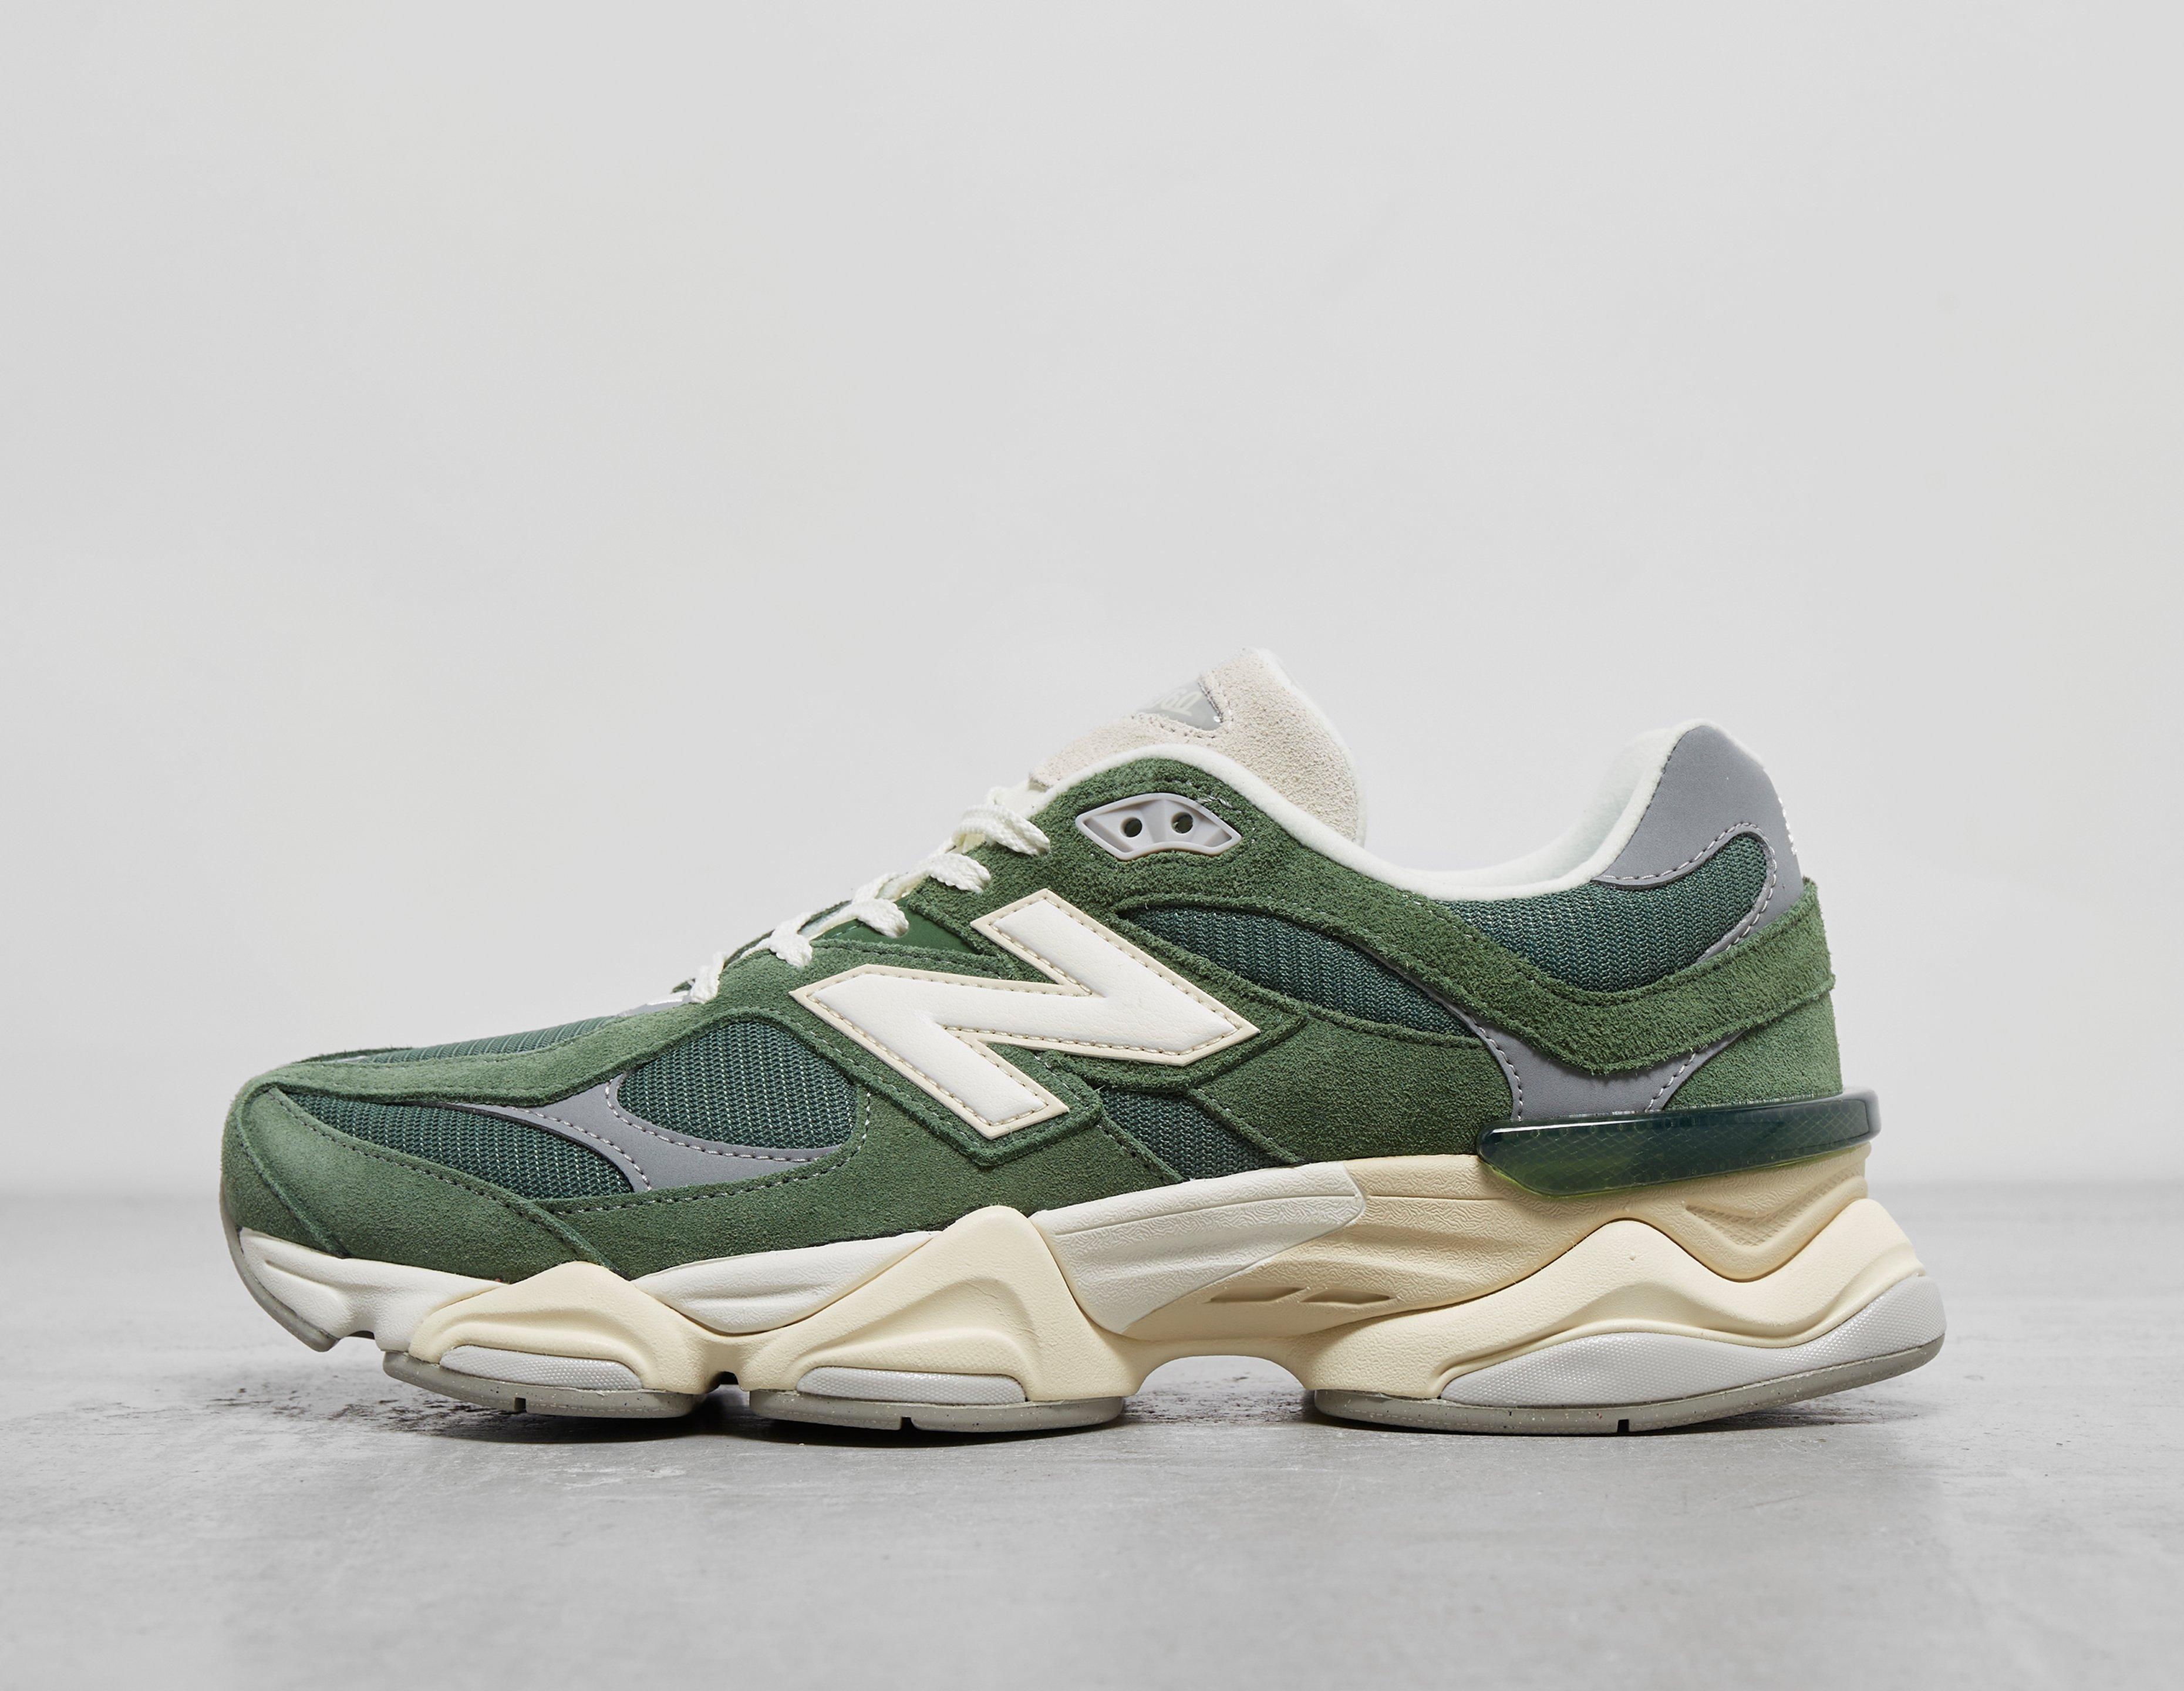 The New Balance 327 Trainer Arrives in Off White & Green - 80's Casual  Classics